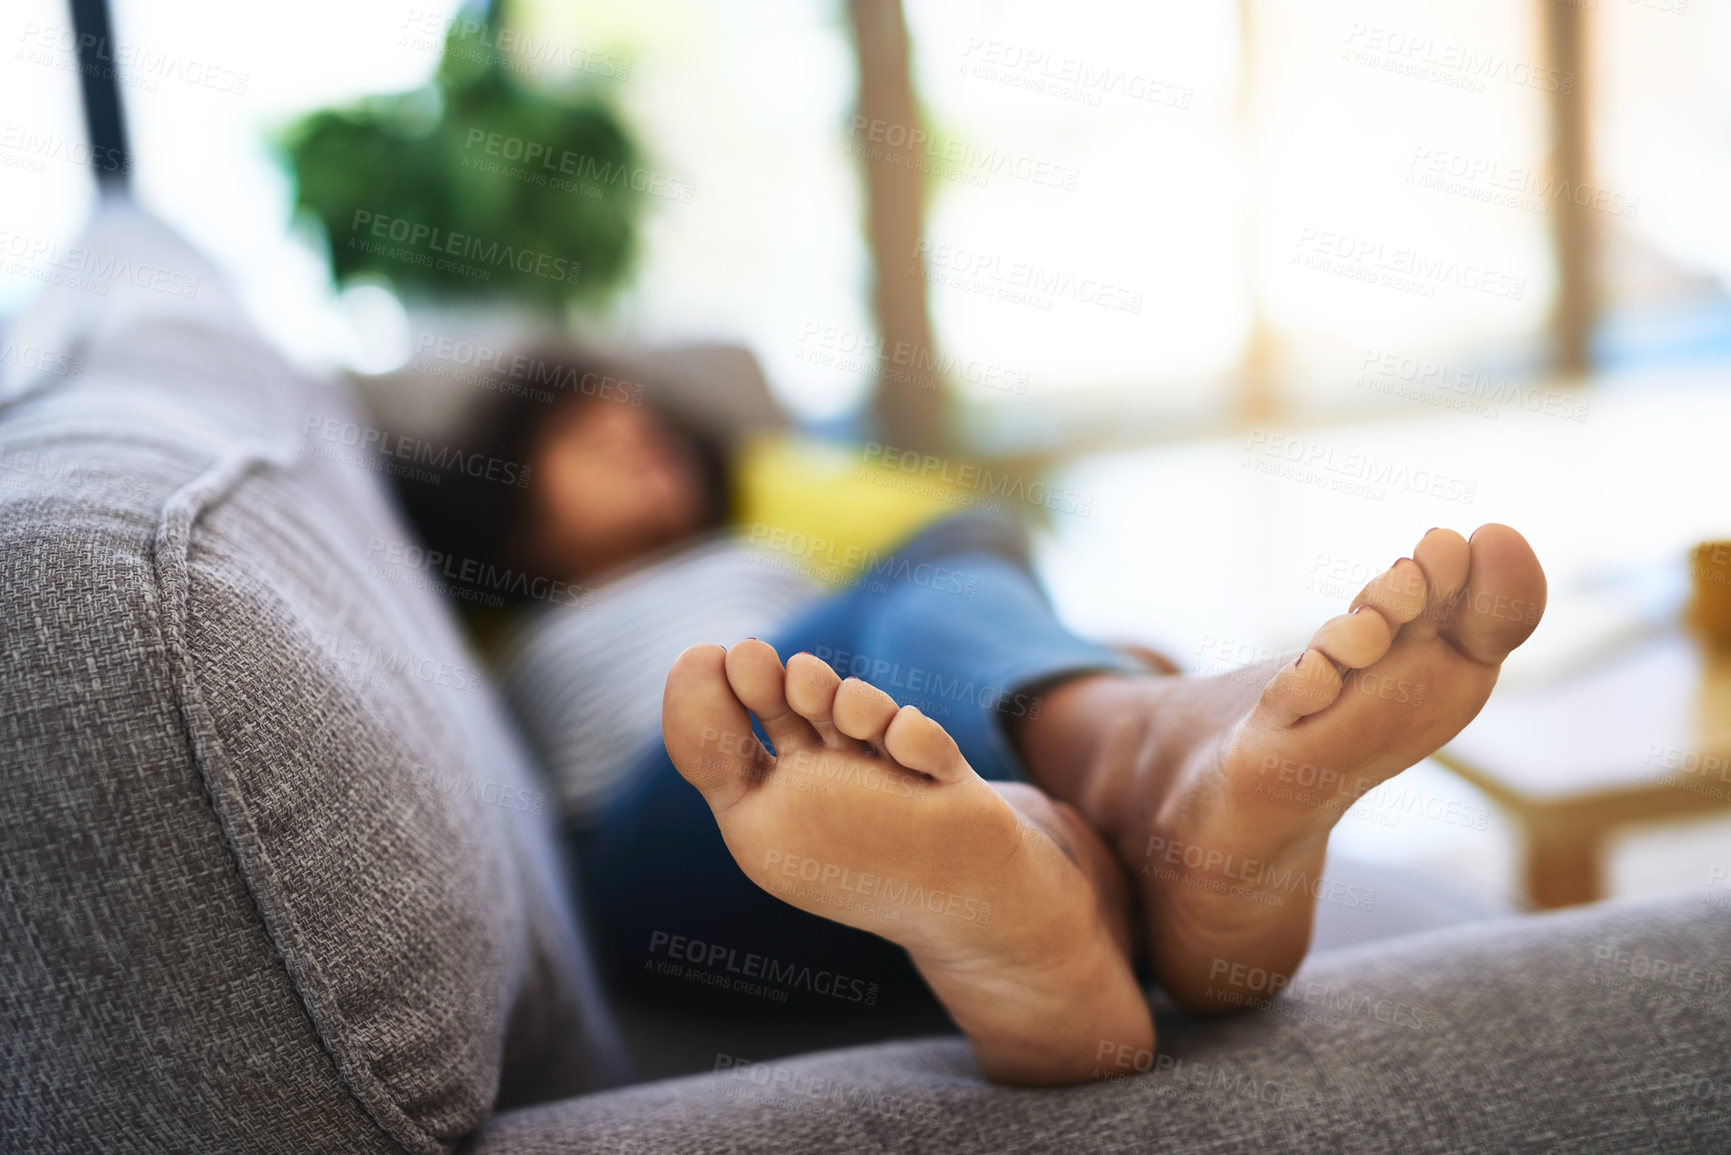 Buy stock photo Shot of an unrecognizable woman relaxing at home on the weekend